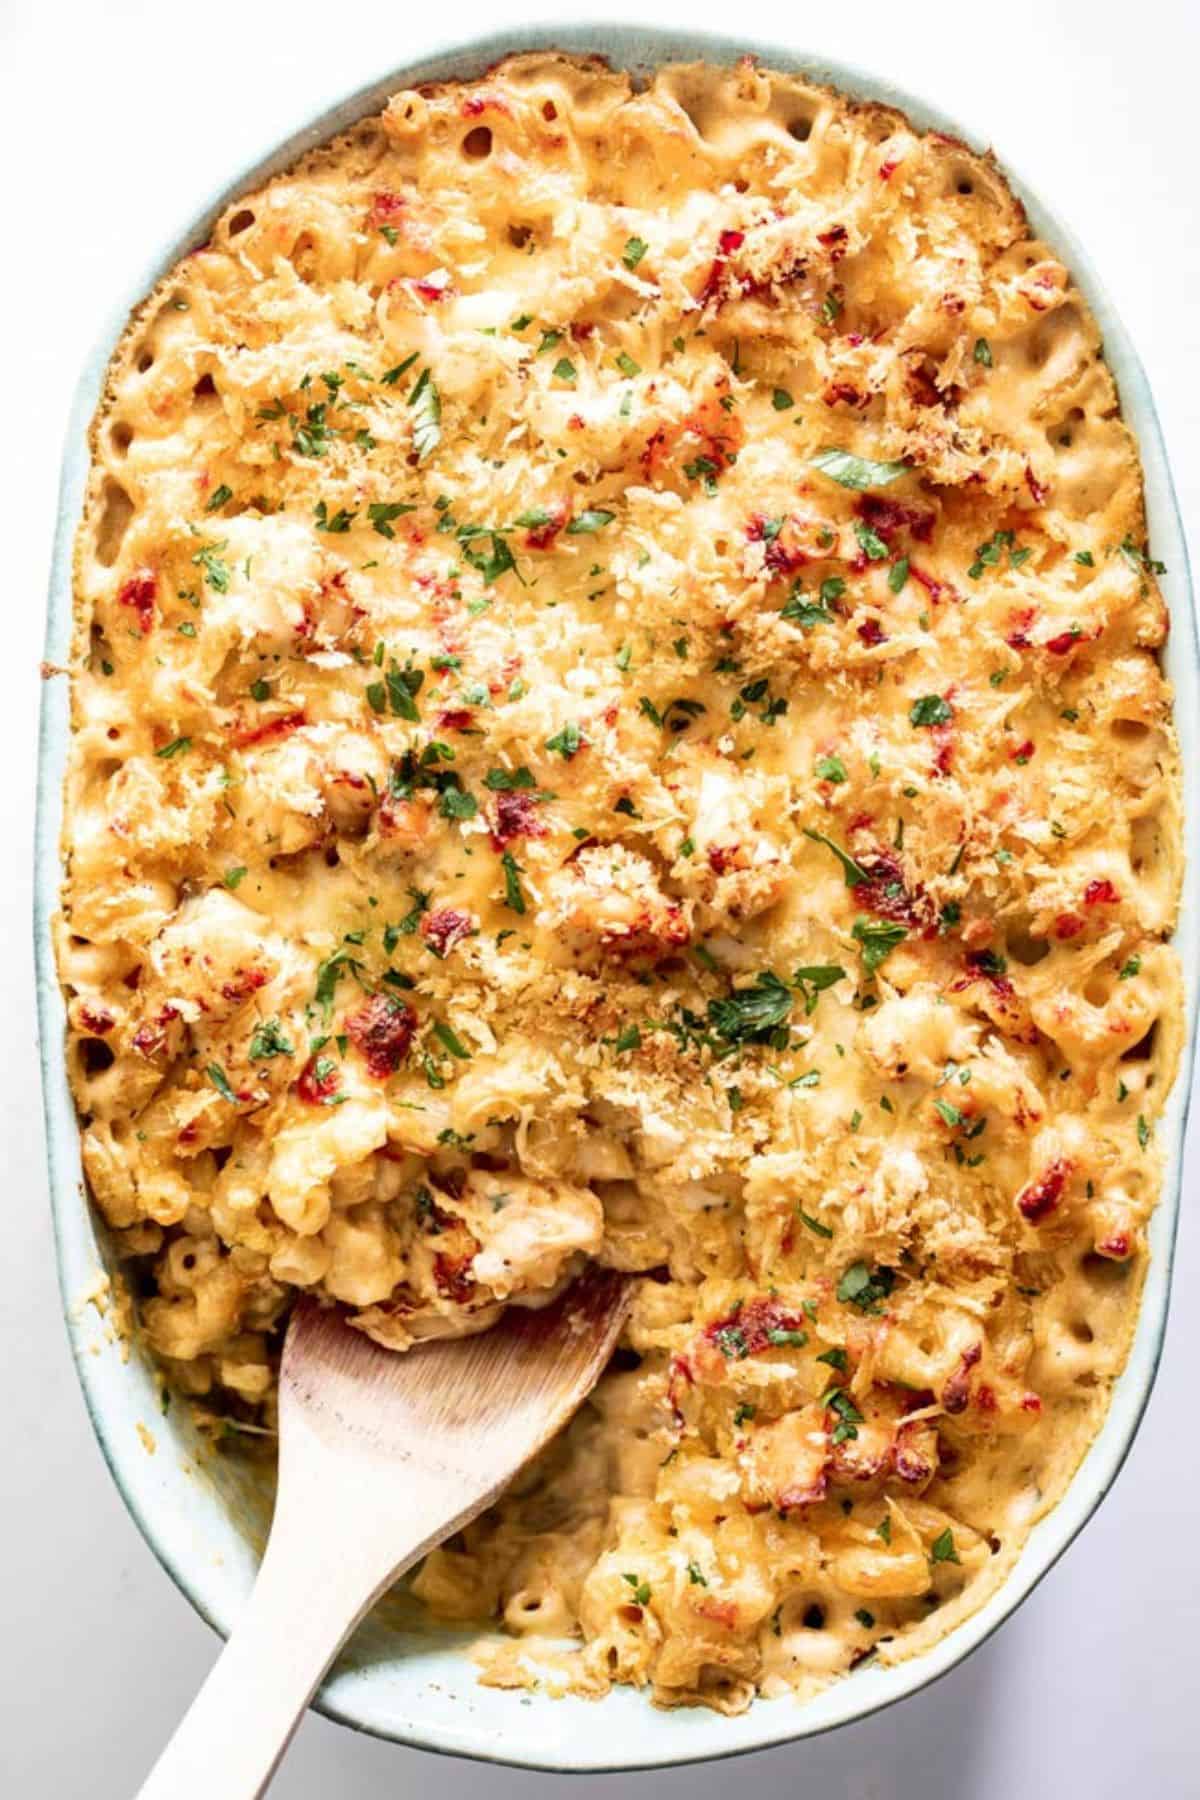 A casserole dish of baked lobster macaroni and cheese